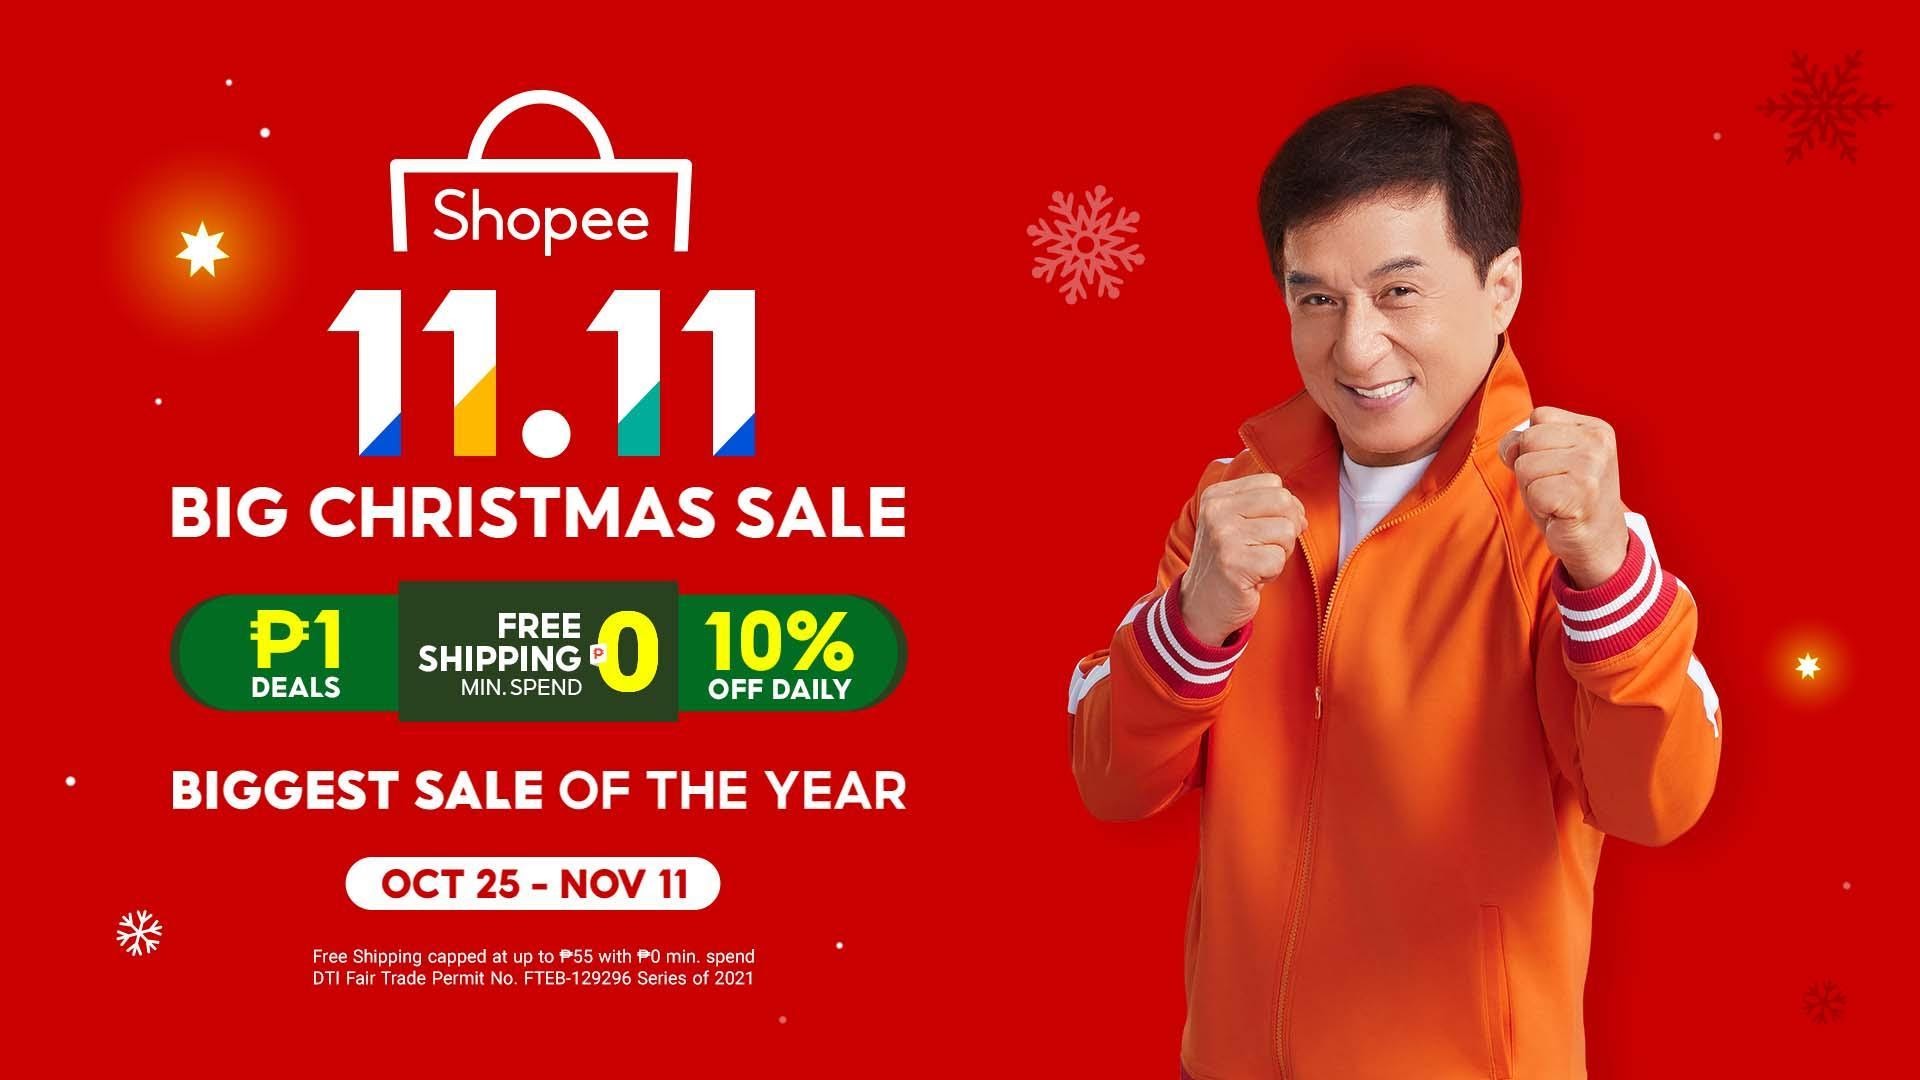 Shopee Biggest Sale of the Year